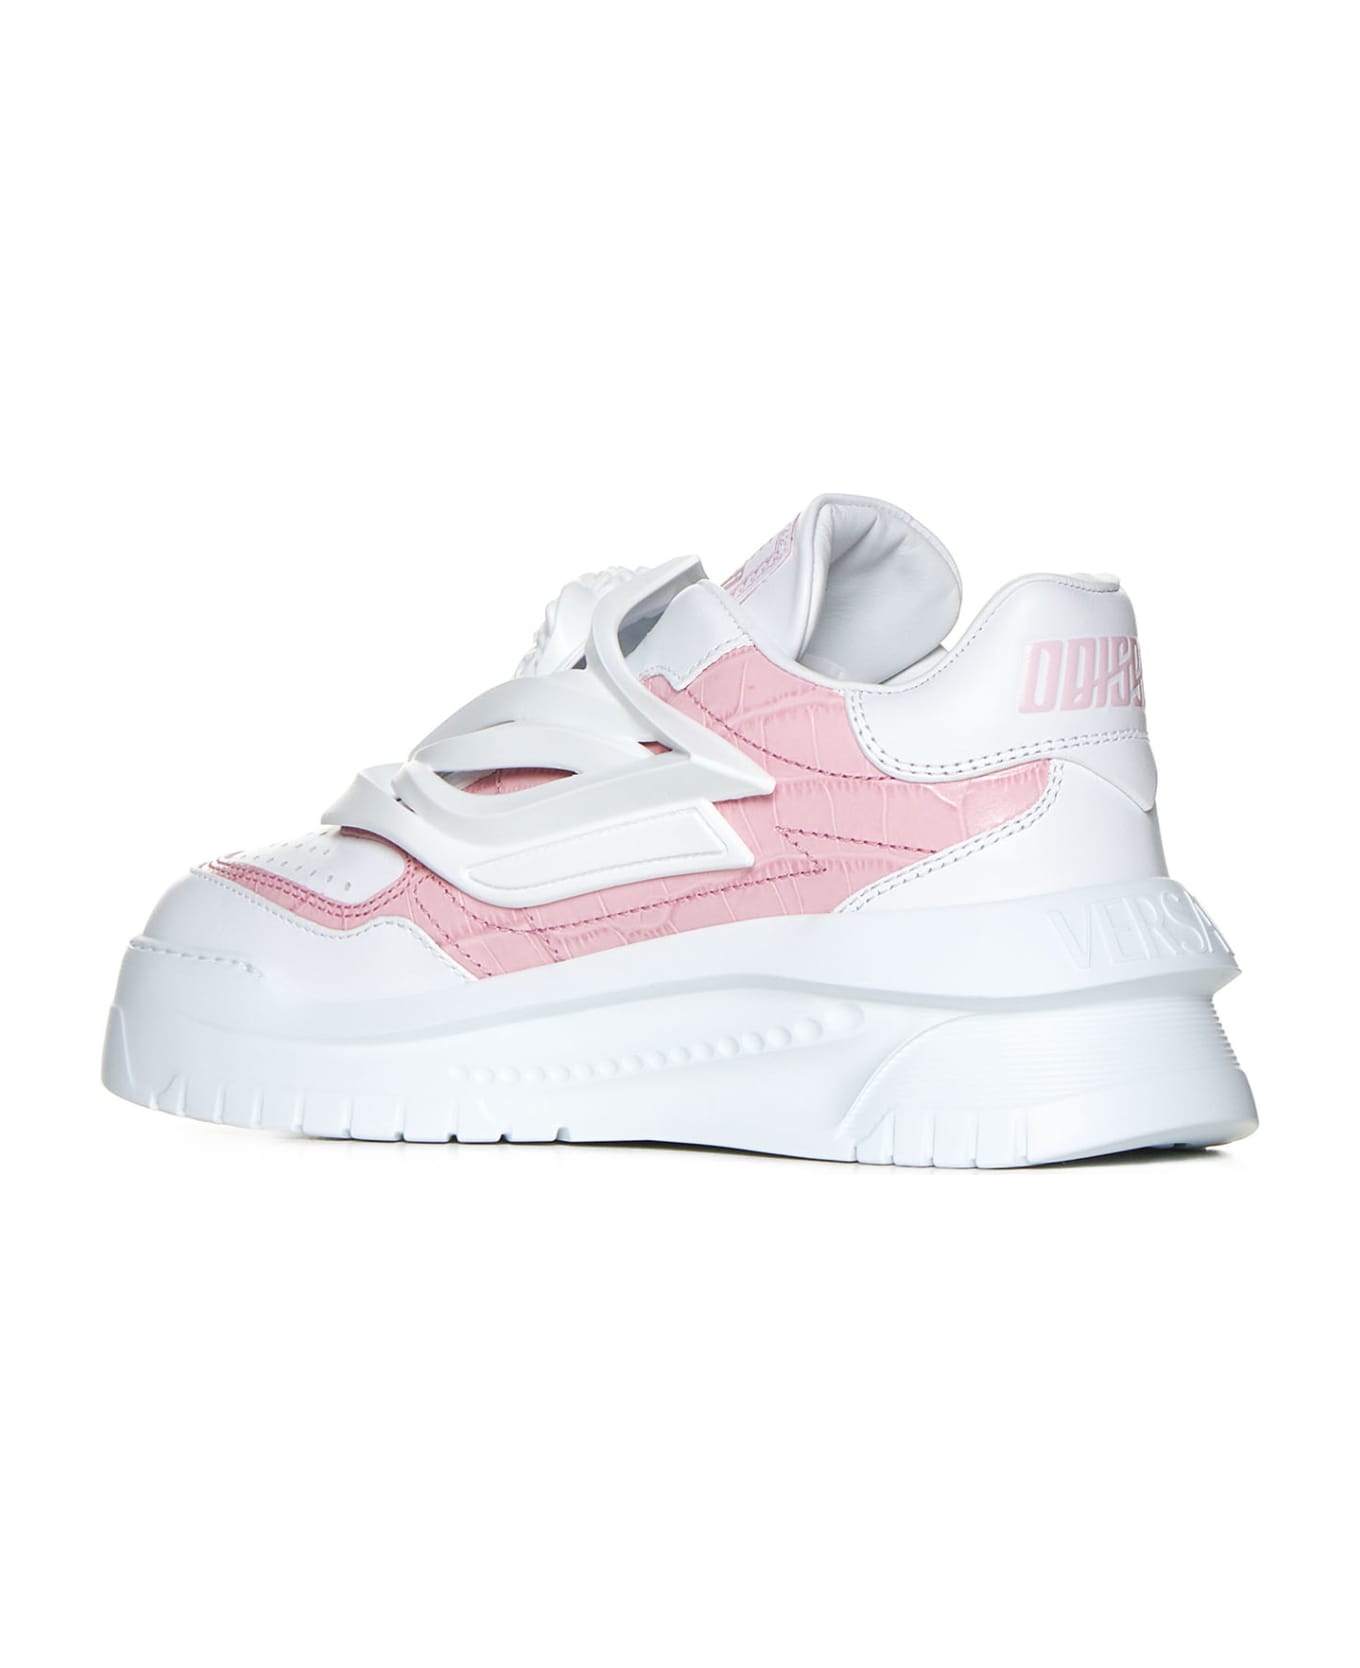 Versace 'odissea' Sneakers - White+english rose